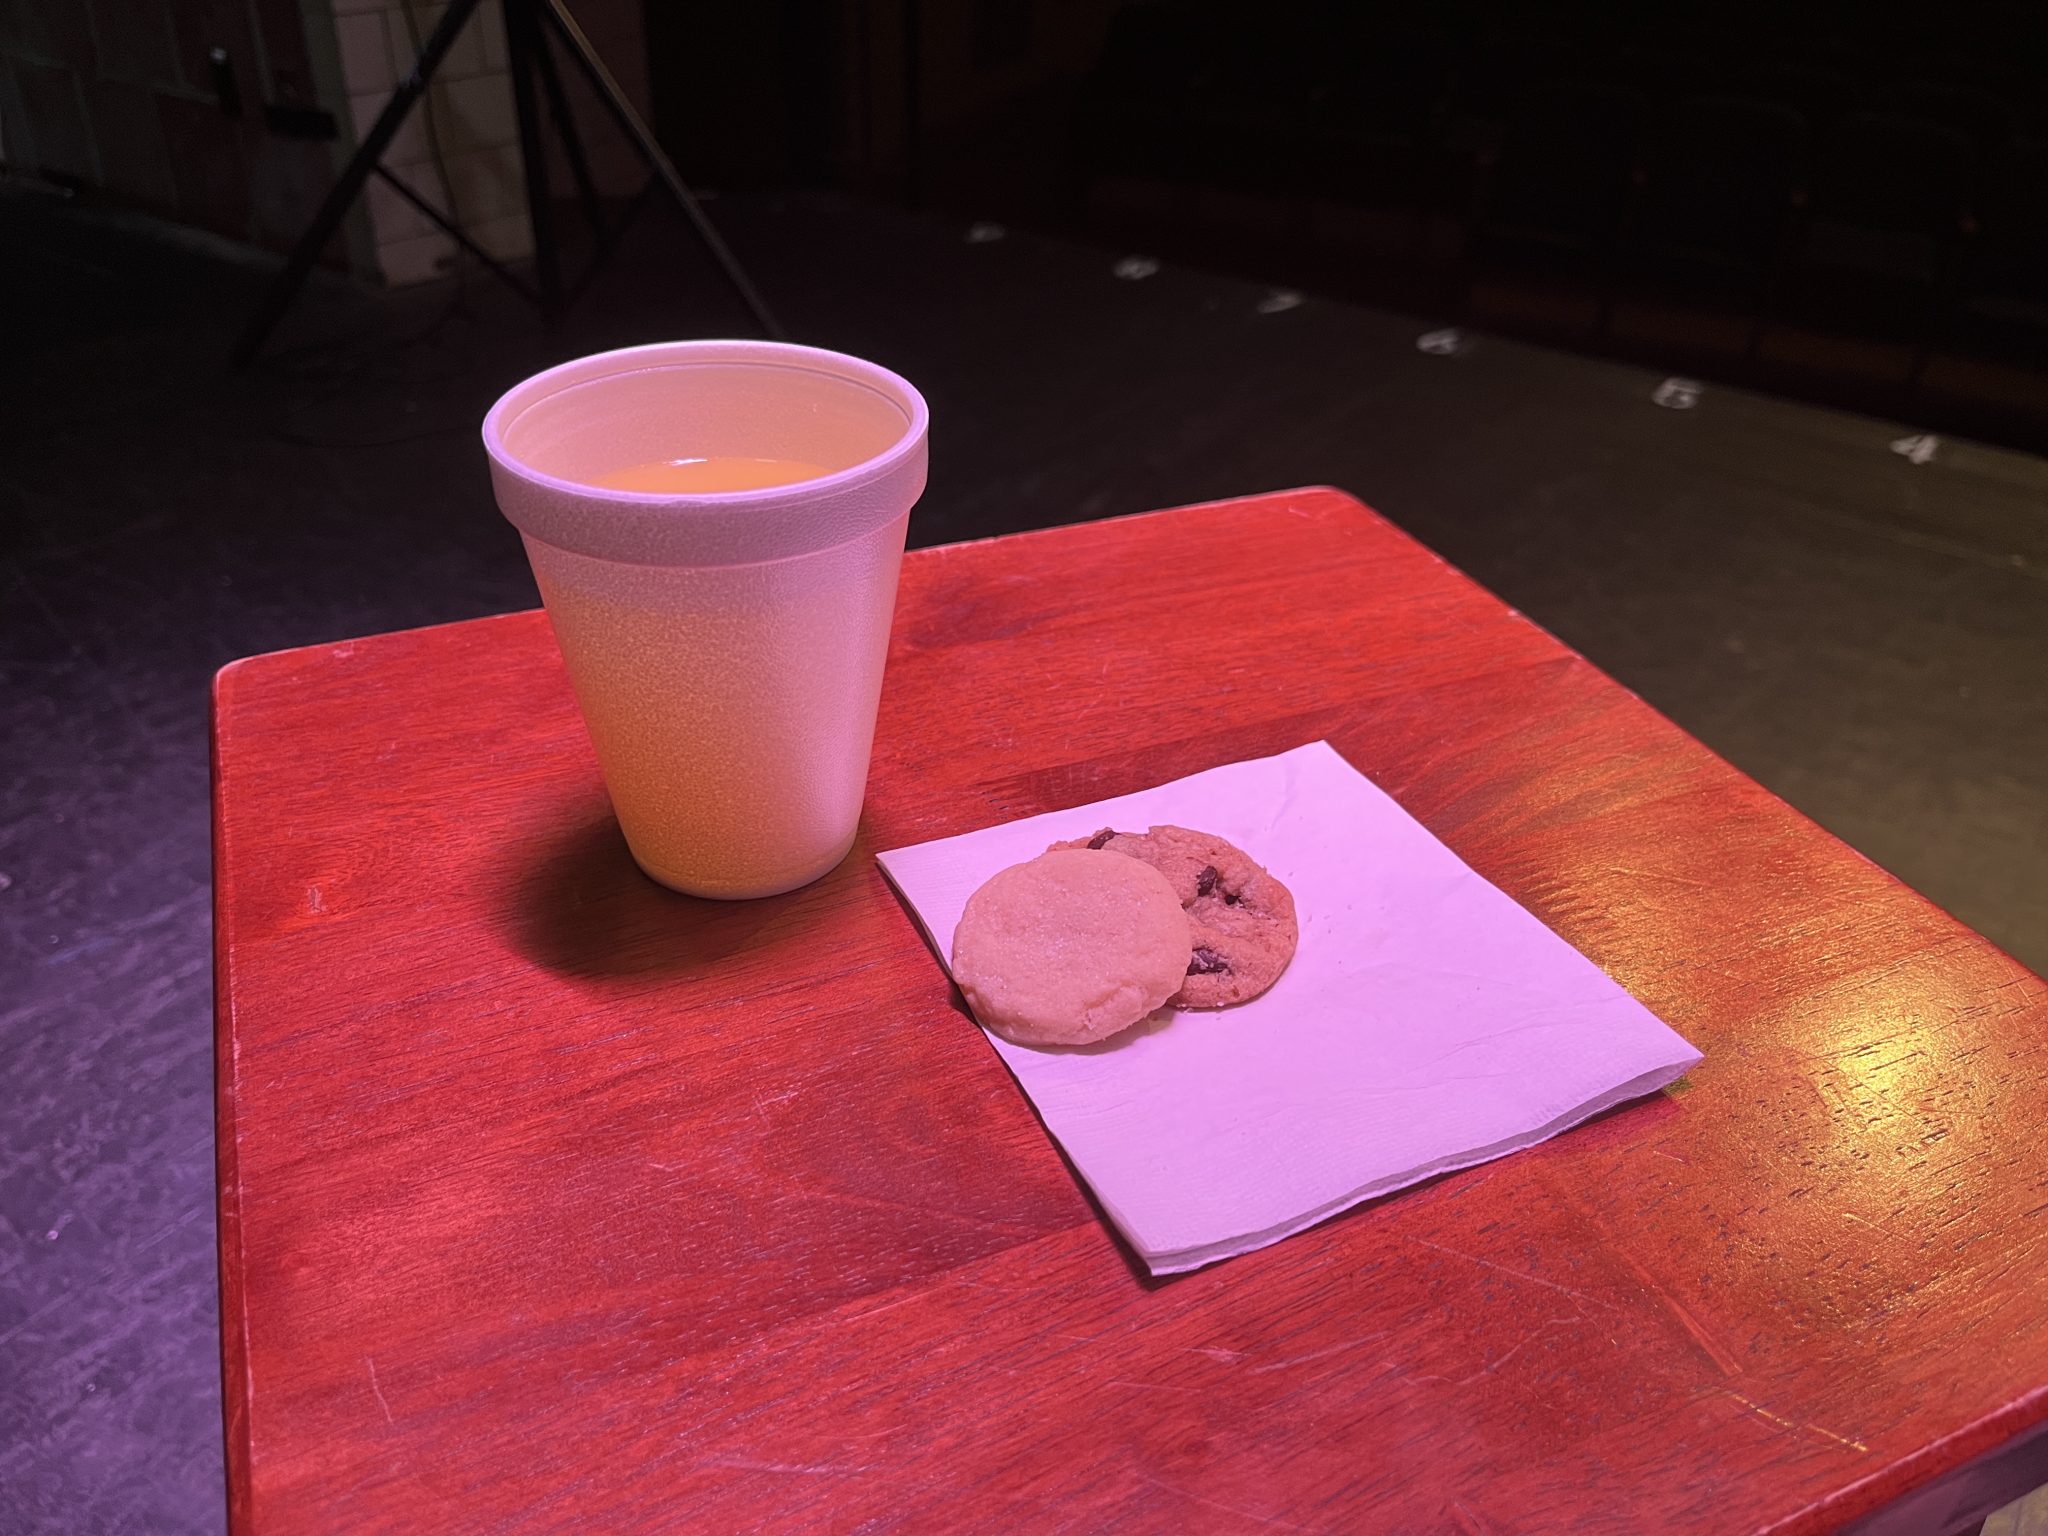 two cookies on a napkin on a small table, with a cup of lemonade, under a spotlight.